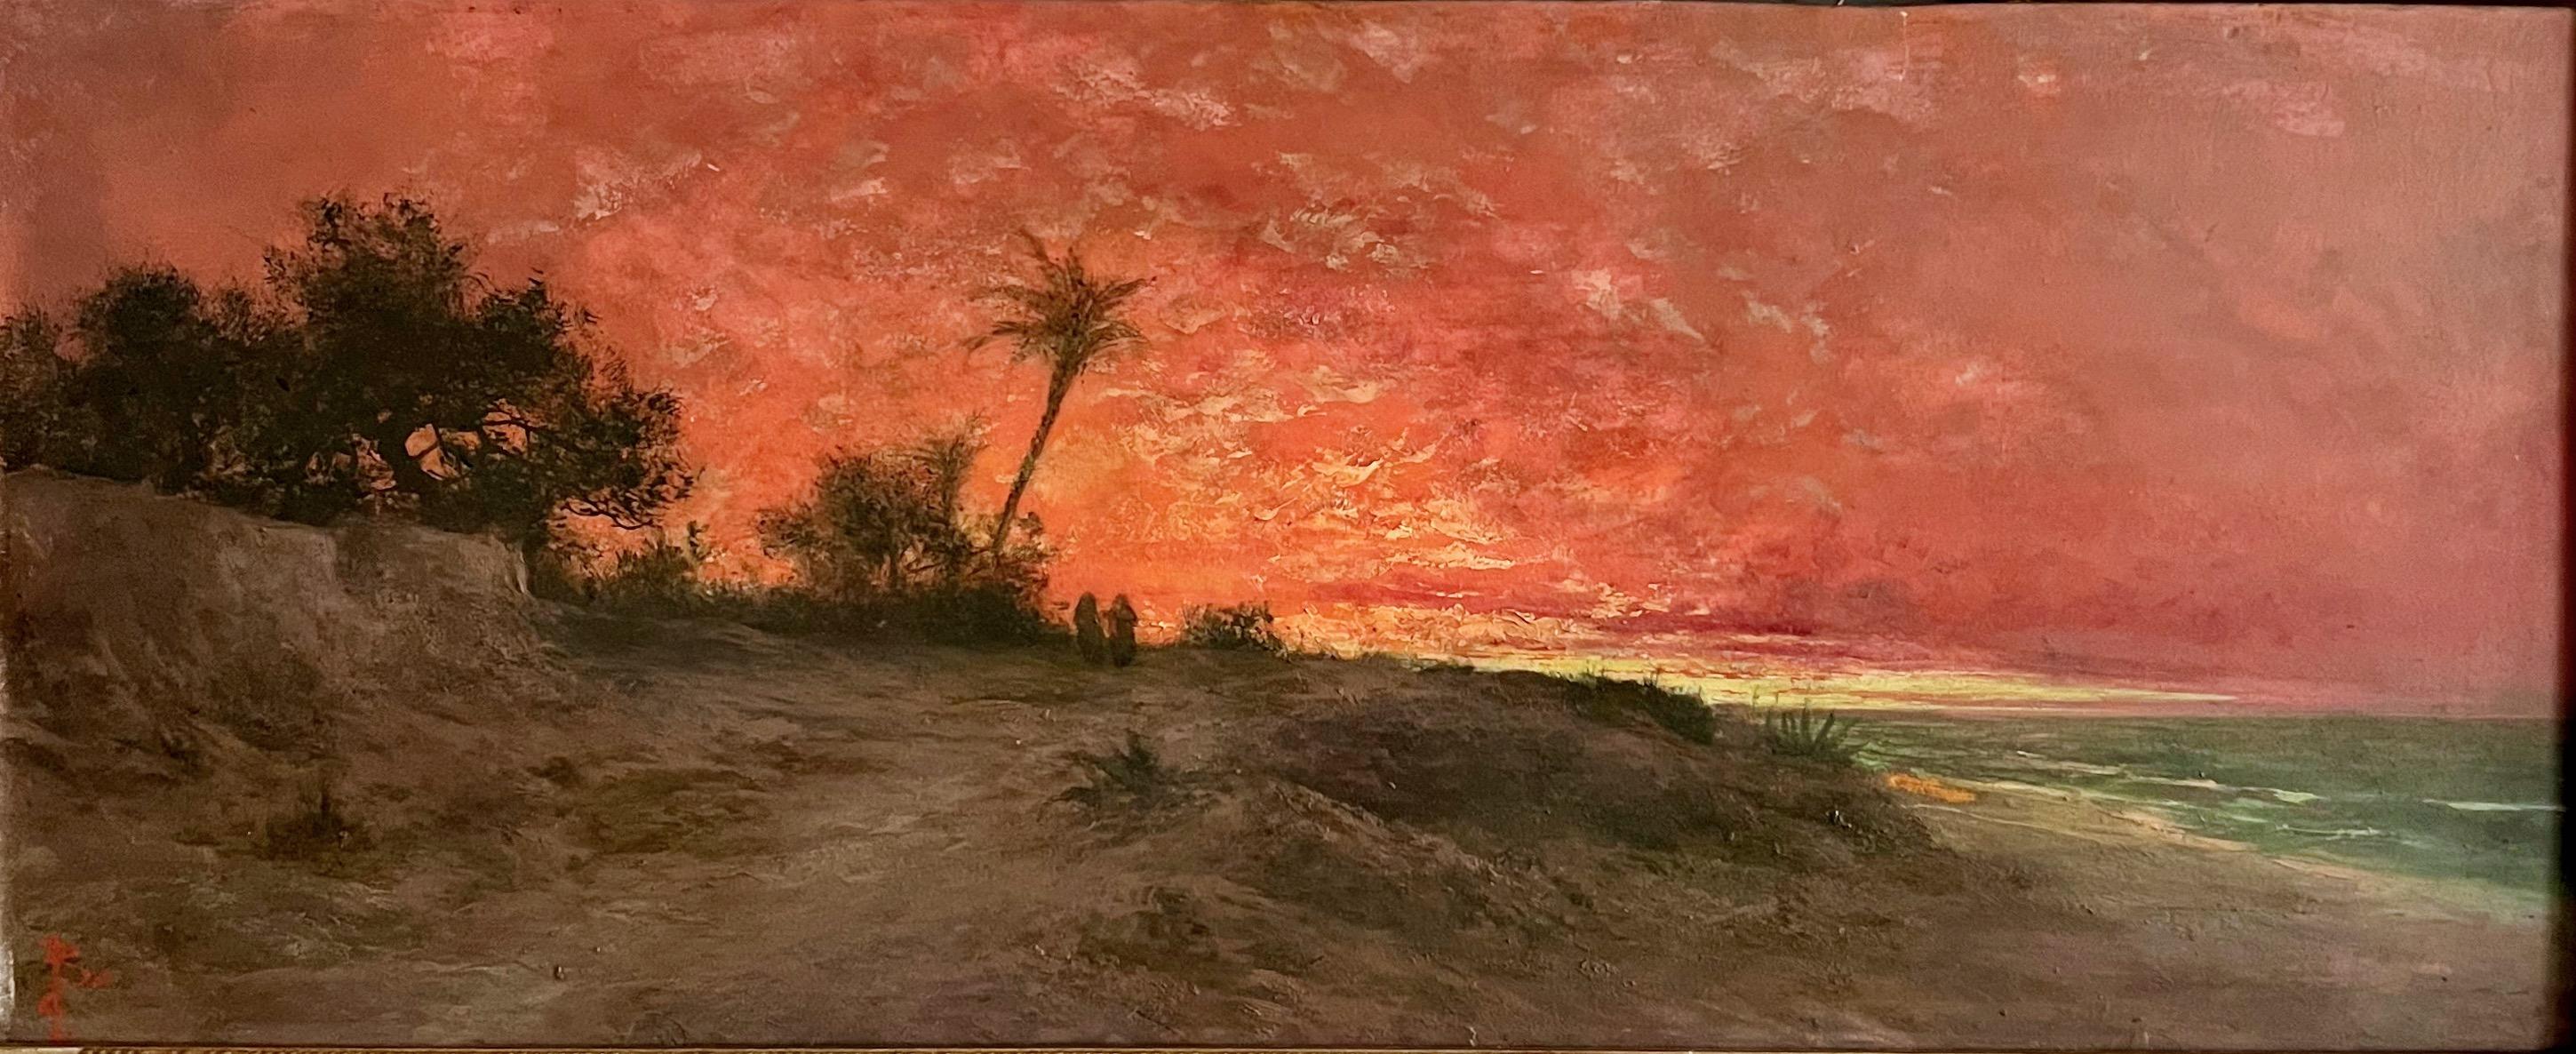 Two Oriental Women Walking Near The Beach and Ocean During Sunset With Red Sky.